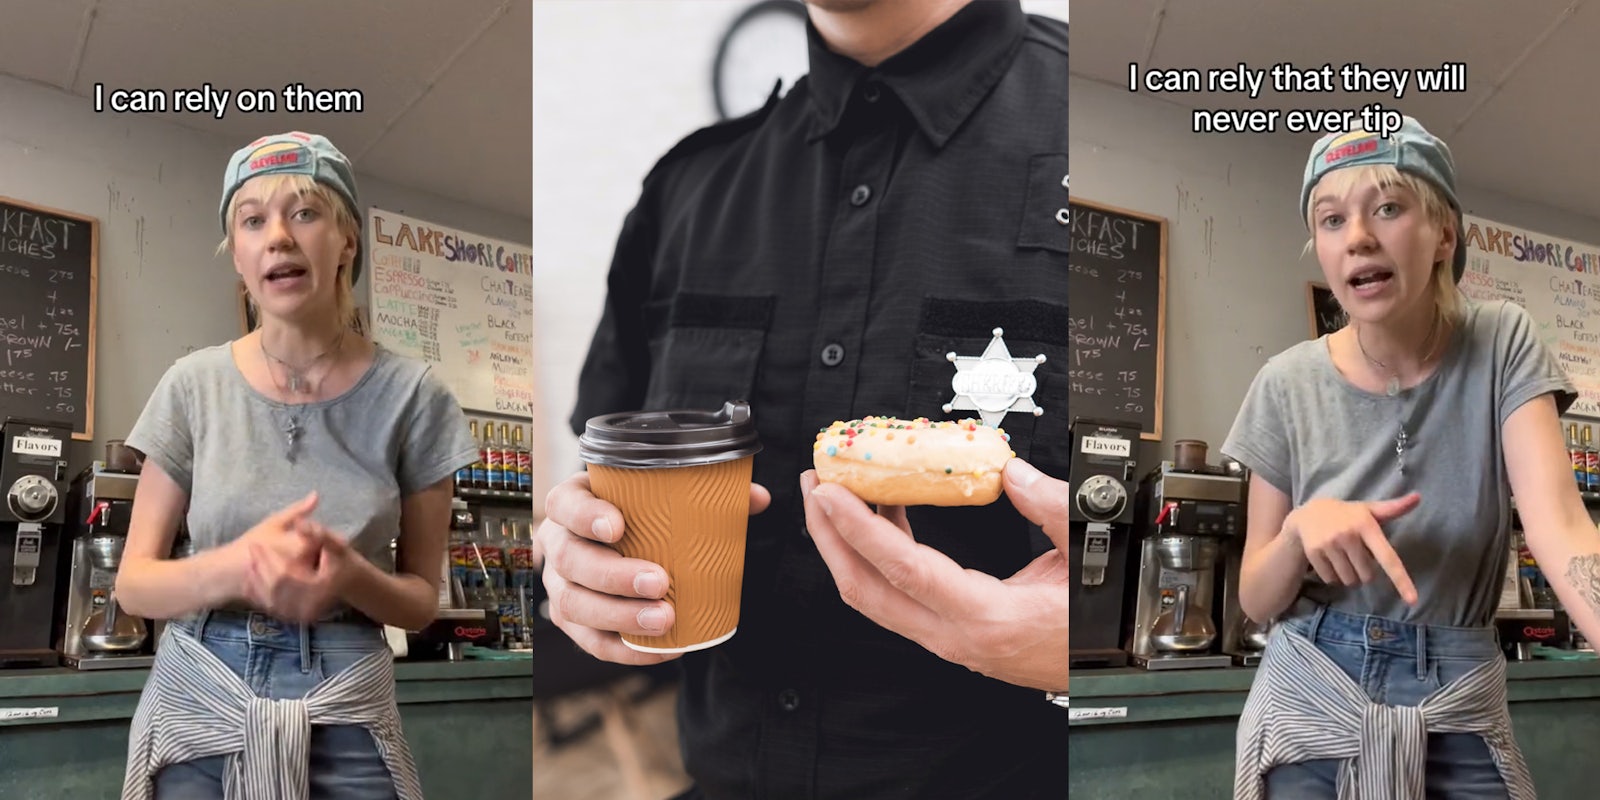 server speaking with caption 'I can rely on them' (l) cop holding coffee and donut (c) server speaking with caption 'I can rely that they will never ever tip' (r)